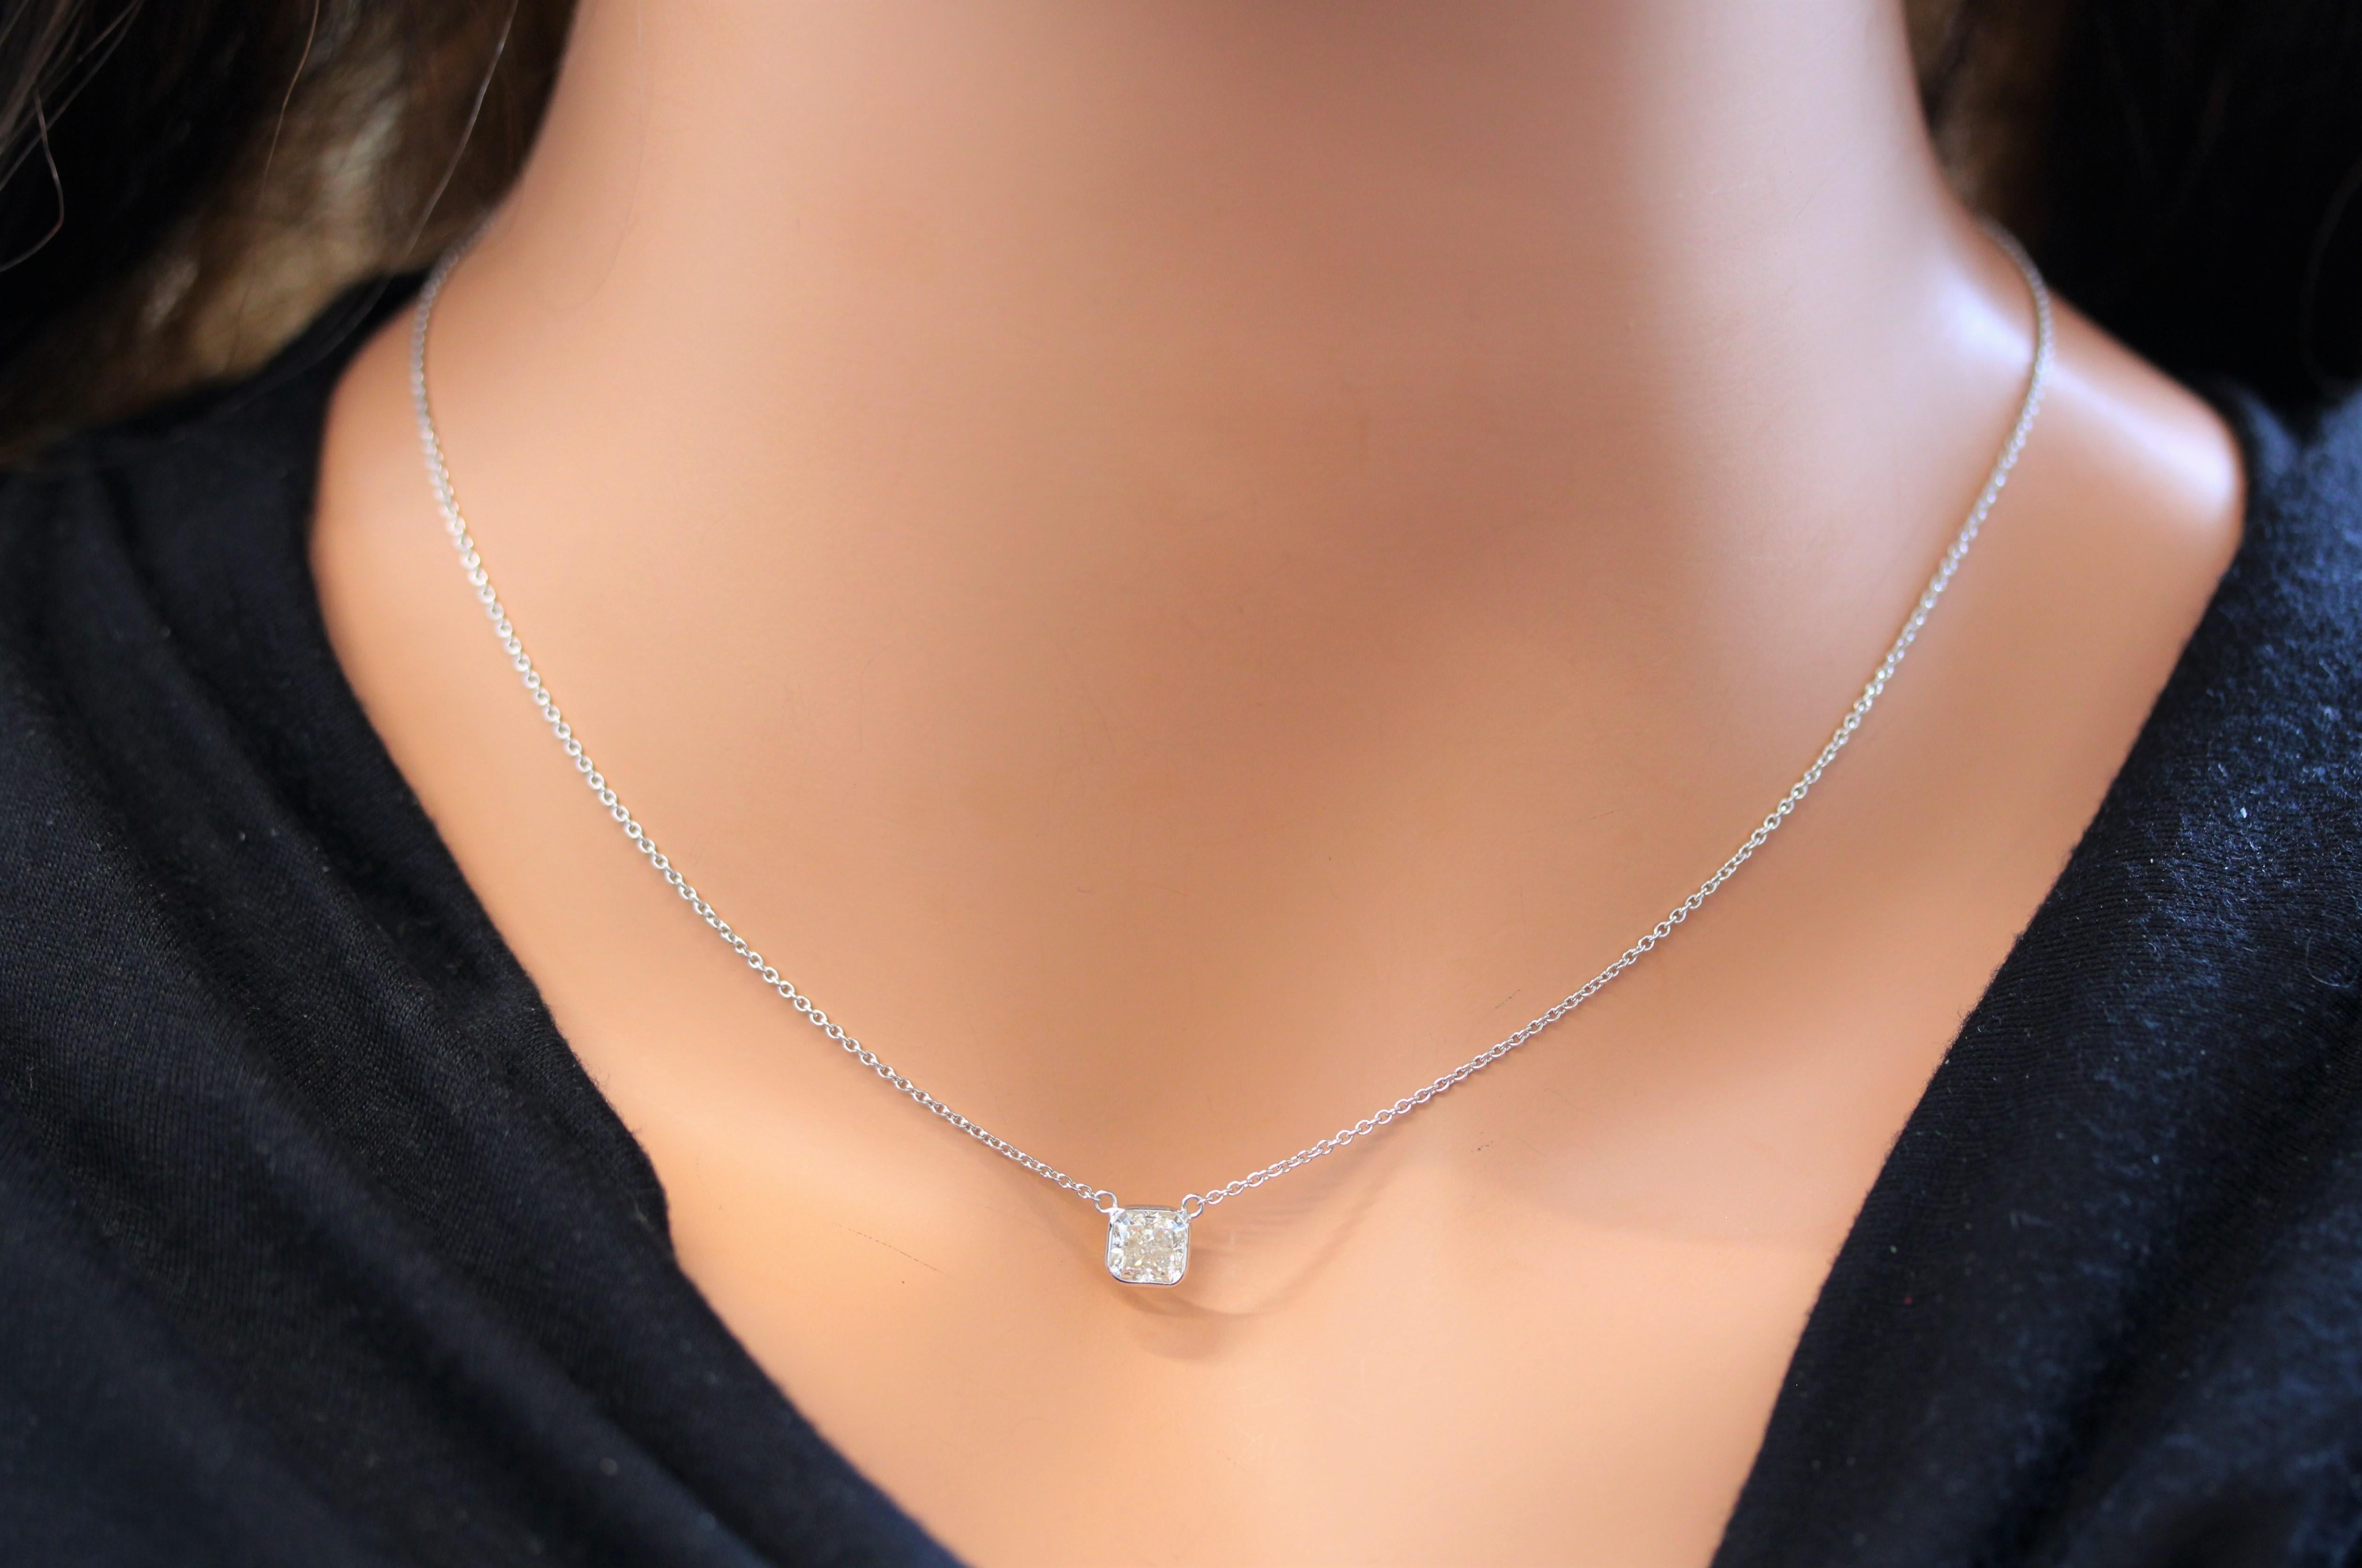 Make a statement worn solo and level up your collar candy when layered. How would you wear it? This is a natural Radiant, color I and clarity SI1 and EGLUSA certified, handmade necklace wire-wrapped in 14k white gold. This is a piece you'll wear